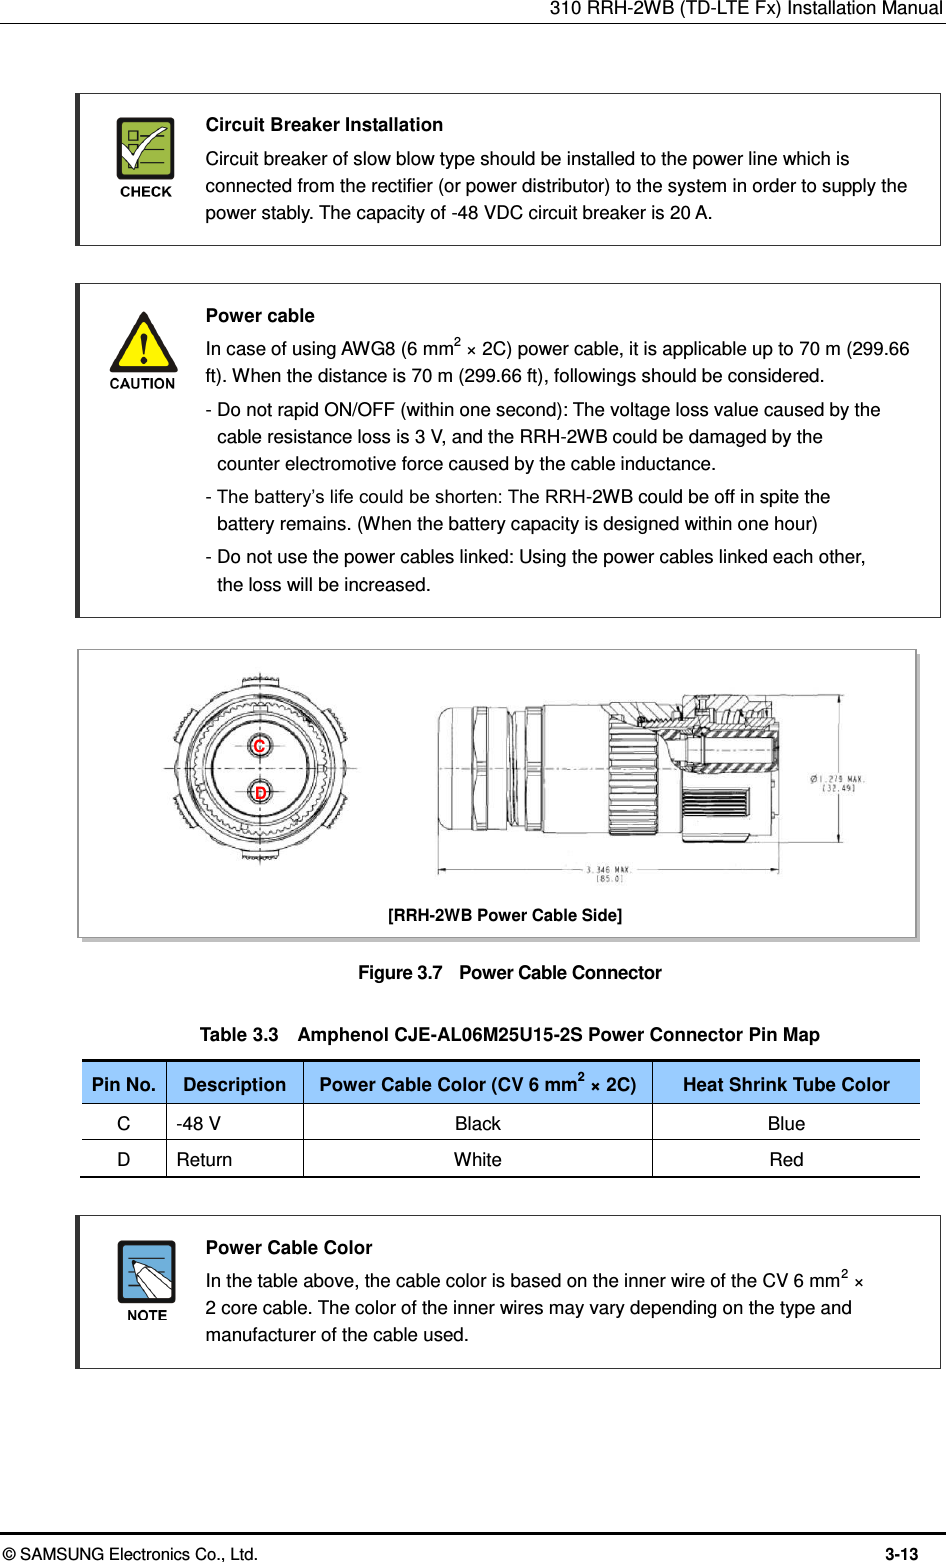 310 RRH-2WB (TD-LTE Fx) Installation Manual  © SAMSUNG Electronics Co., Ltd.  3-13 [RRH-2WB Power Cable Side] C D   Circuit Breaker Installation   Circuit breaker of slow blow type should be installed to the power line which is connected from the rectifier (or power distributor) to the system in order to supply the power stably. The capacity of -48 VDC circuit breaker is 20 A.   Power cable   In case of using AWG8 (6 mm2 × 2C) power cable, it is applicable up to 70 m (299.66 ft). When the distance is 70 m (299.66 ft), followings should be considered.   - Do not rapid ON/OFF (within one second): The voltage loss value caused by the   cable resistance loss is 3 V, and the RRH-2WB could be damaged by the   counter electromotive force caused by the cable inductance.   - The battery’s life could be shorten: The RRH-2WB could be off in spite the   battery remains. (When the battery capacity is designed within one hour)   - Do not use the power cables linked: Using the power cables linked each other,   the loss will be increased.  Figure 3.7    Power Cable Connector  Table 3.3    Amphenol CJE-AL06M25U15-2S Power Connector Pin Map Pin No. Description Power Cable Color (CV 6 mm2 × 2C) Heat Shrink Tube Color C -48 V Black Blue D Return White Red   Power Cable Color   In the table above, the cable color is based on the inner wire of the CV 6 mm2 ×   2 core cable. The color of the inner wires may vary depending on the type and manufacturer of the cable used.  